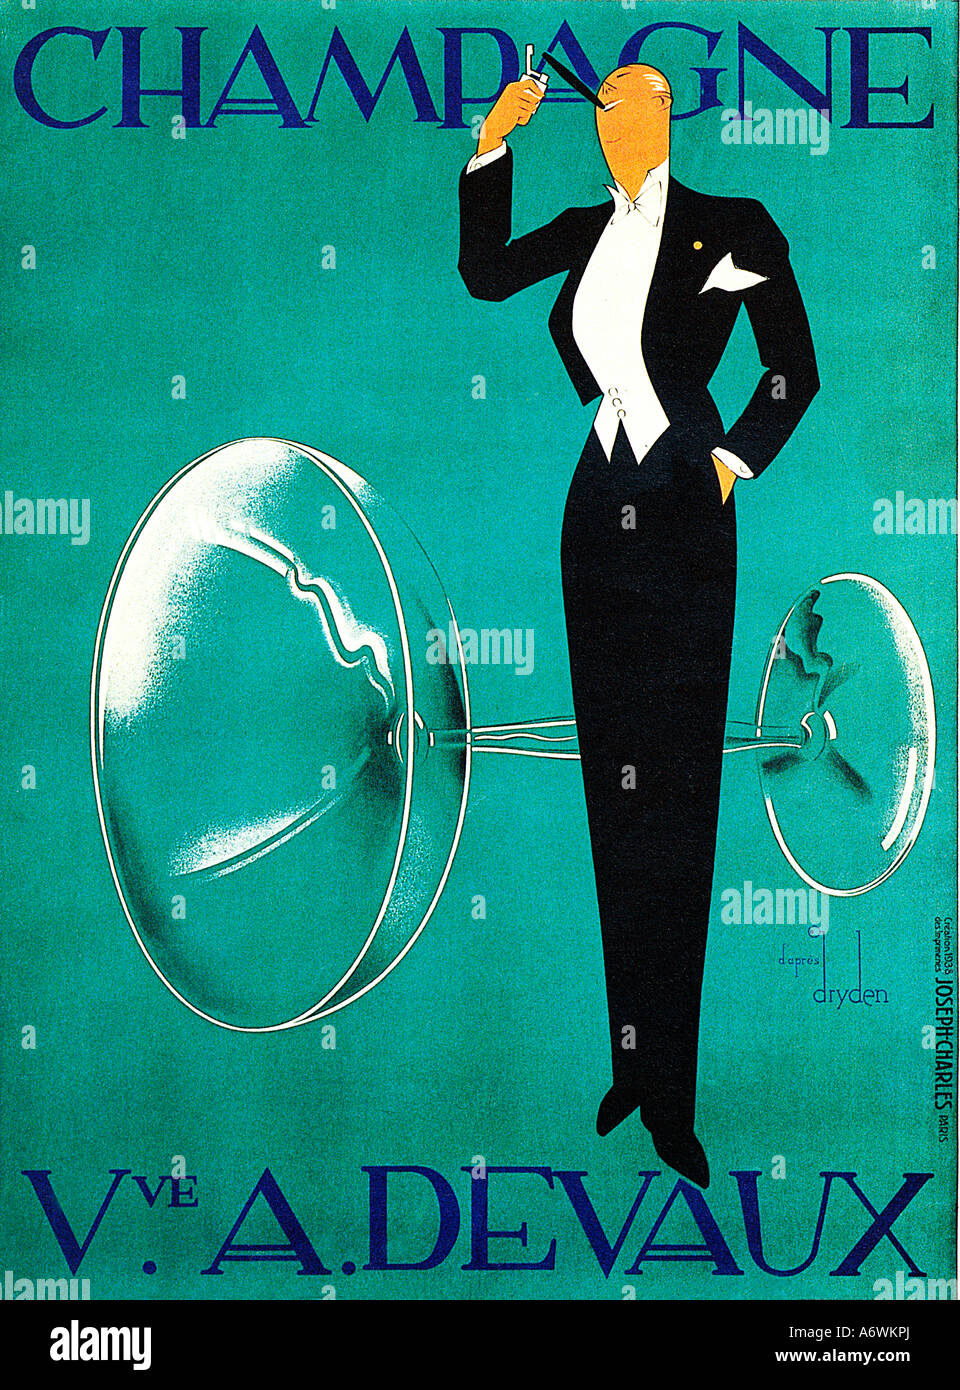 Champagne Devaux the famous 1930s Art Deco poster for the French house by Ernst Dryden Stock Photo